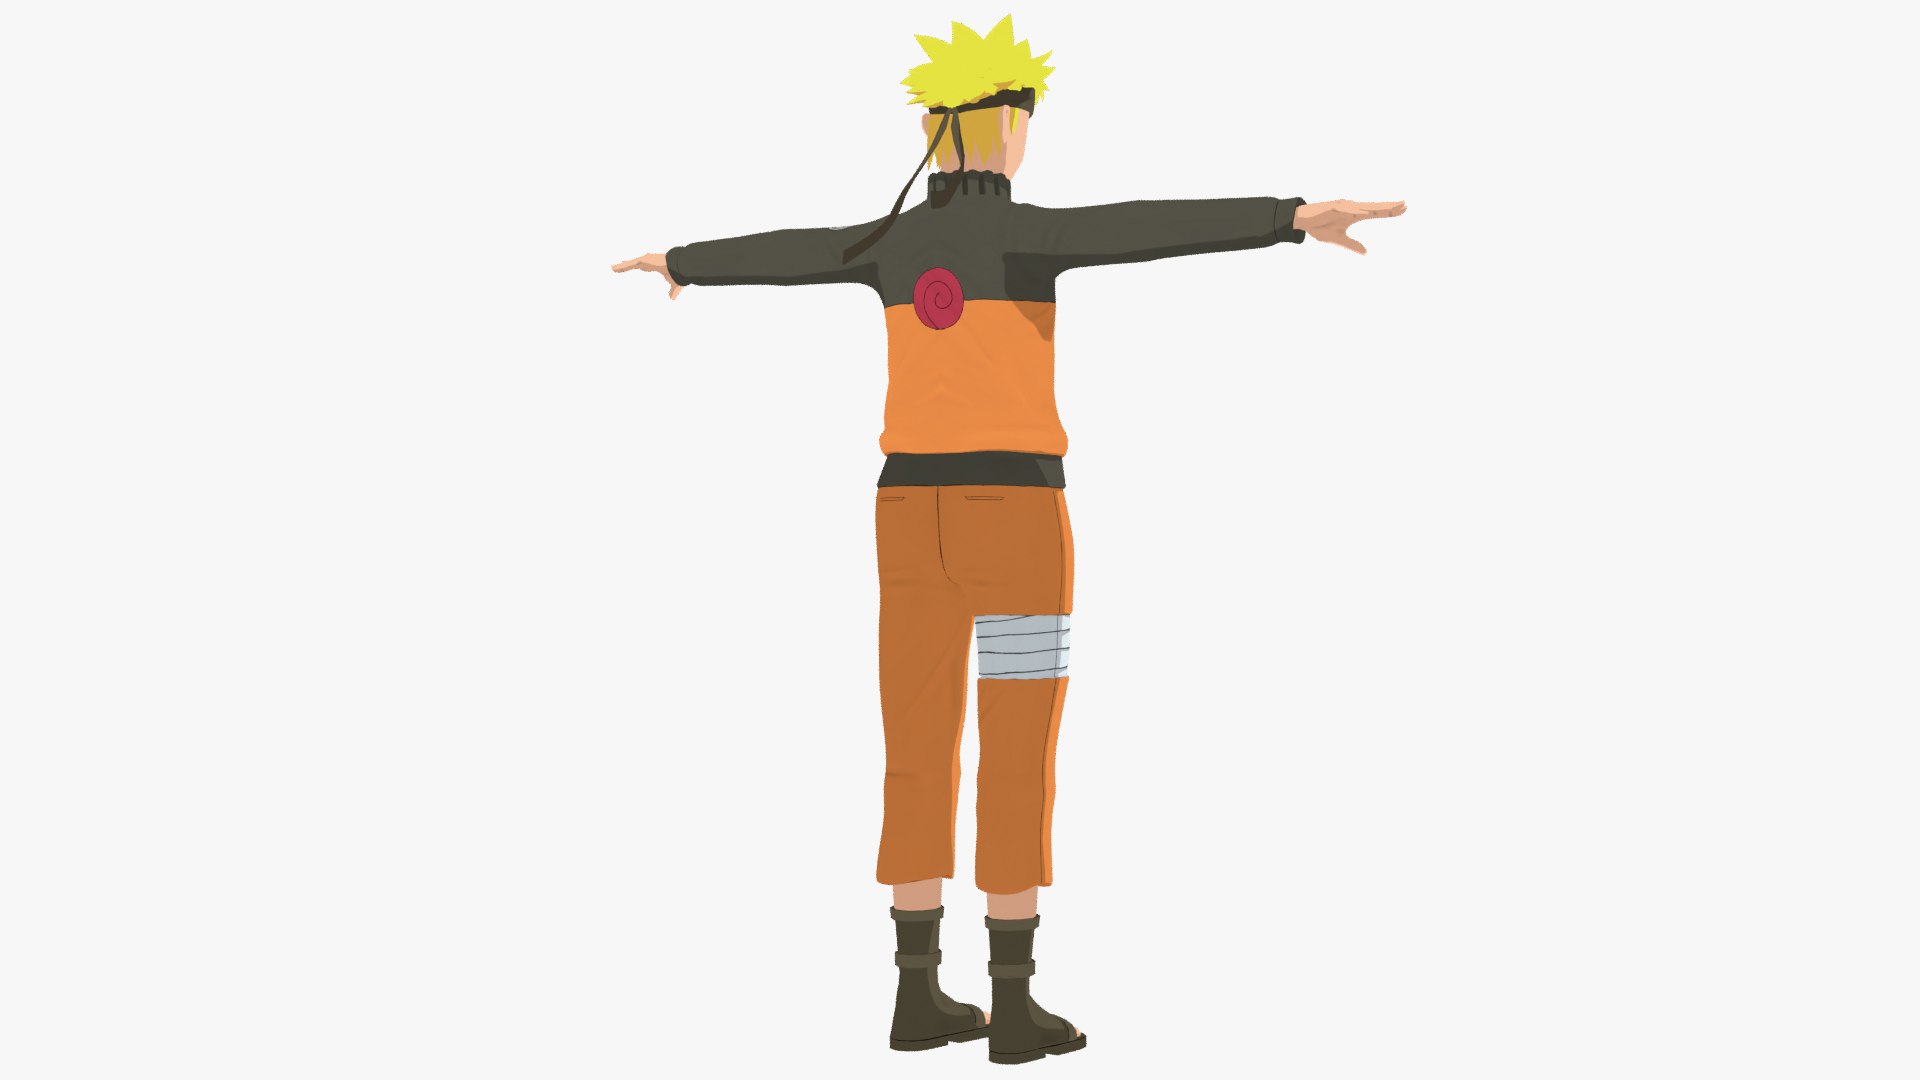 4,805 Naruto Images, Stock Photos, 3D objects, & Vectors